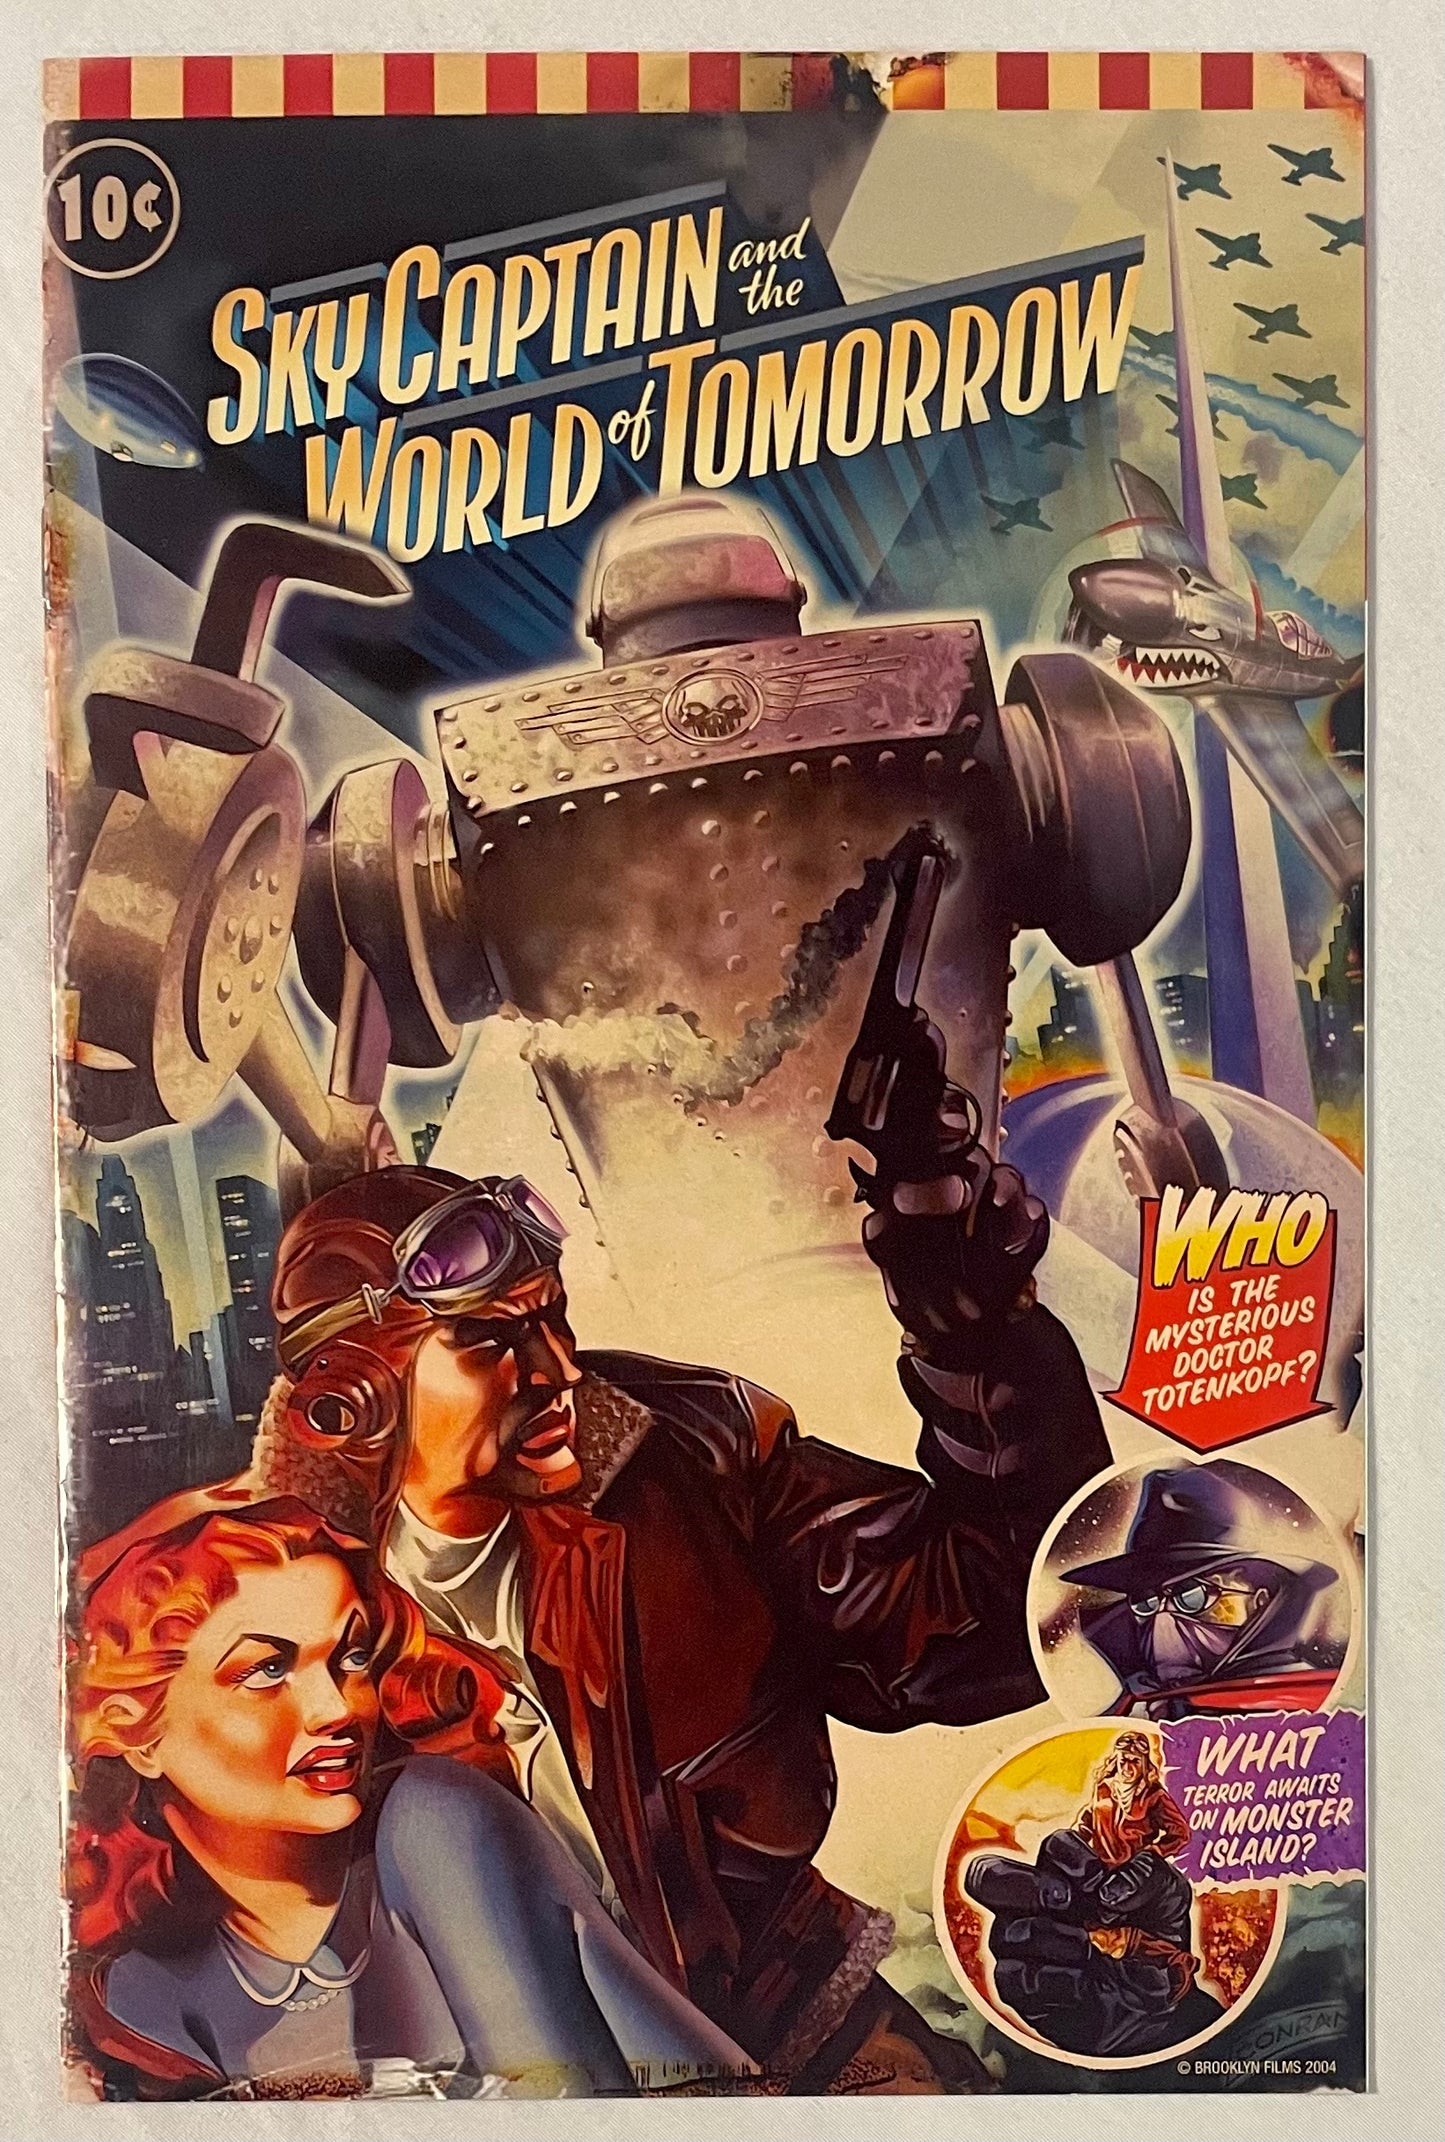 Sky Captain and the World of Tomorrow #1